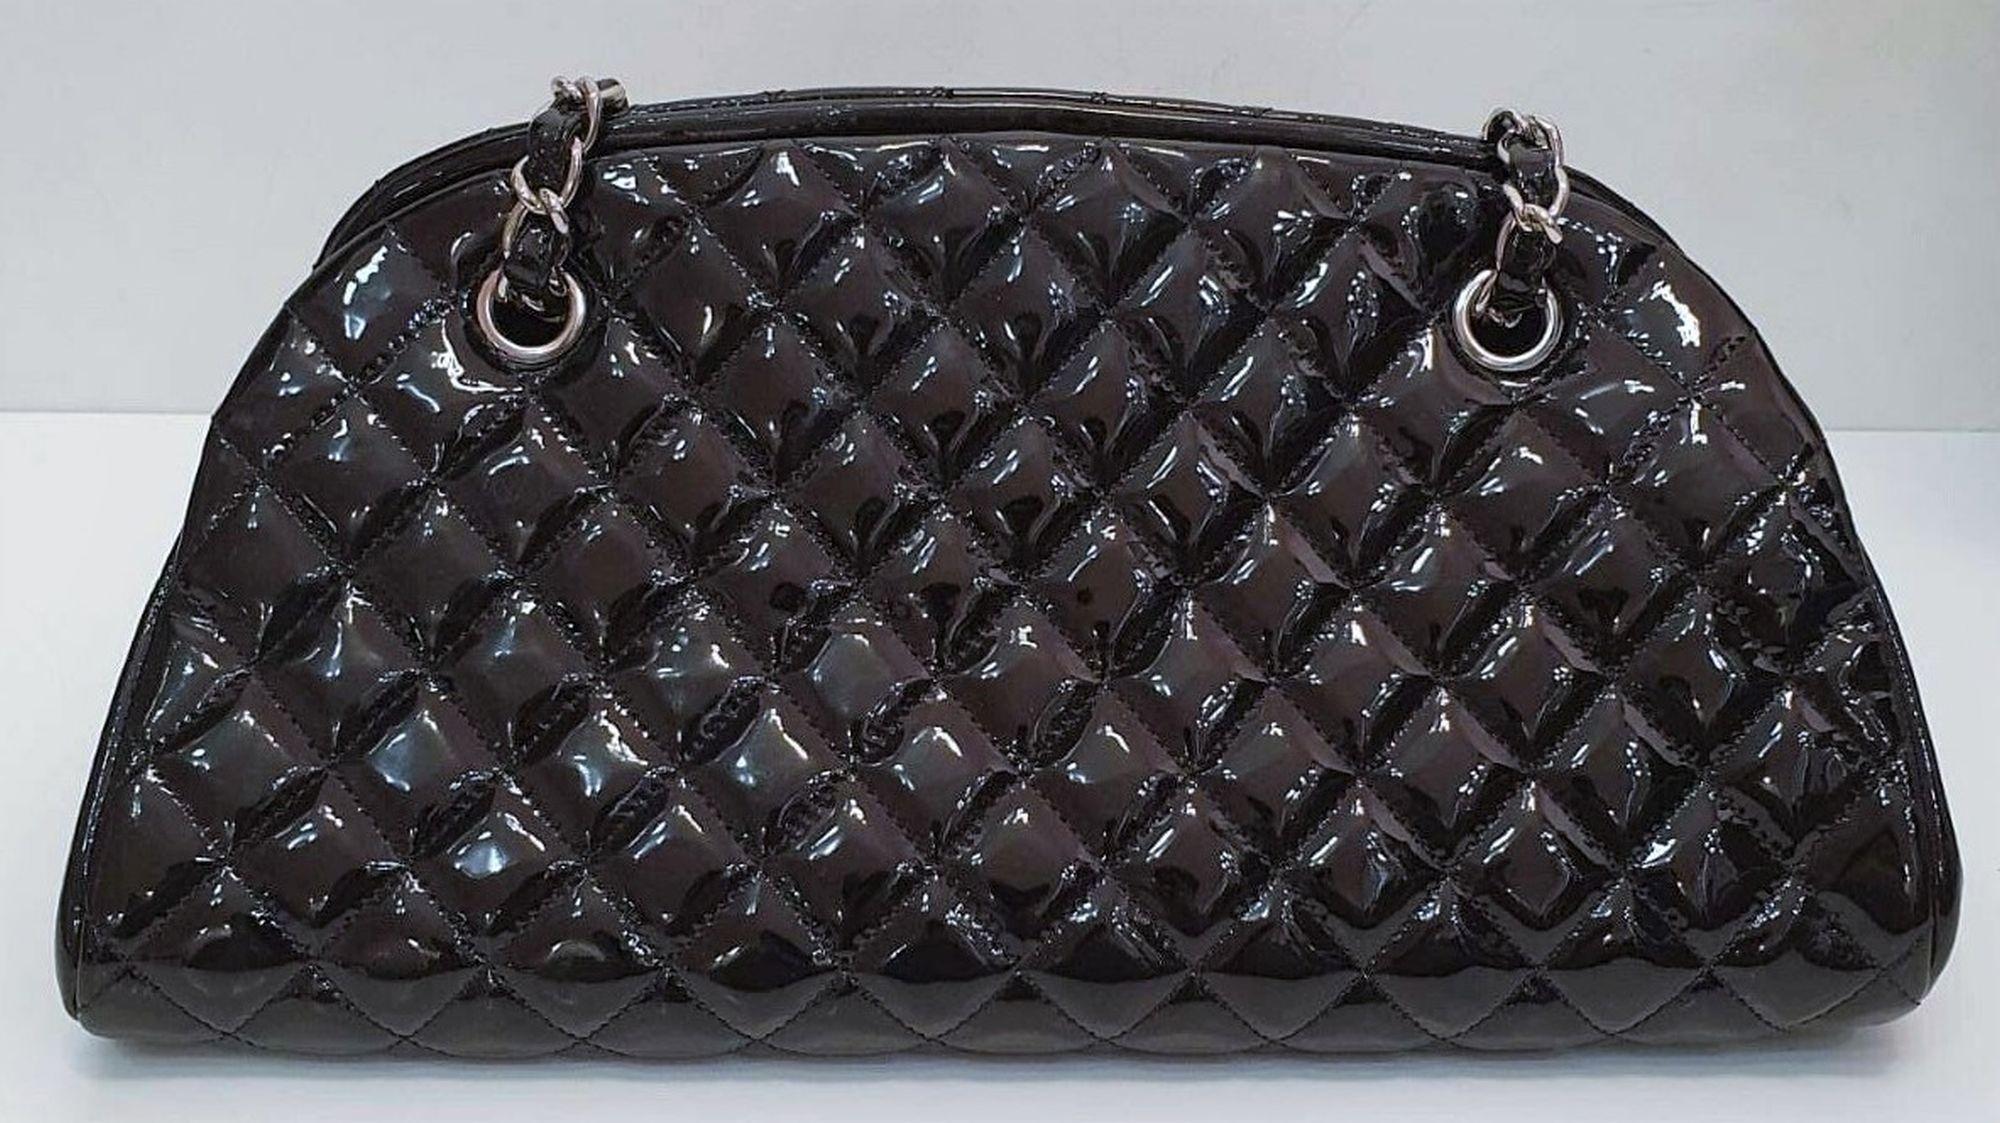 Classic Vintage Chanel Quilted Shoulder Bag - 

This Chanel patent leather diamond cut design. Silvered Chain with leather strap. The strap may be pulled completely to one side or used for a longer handbag look or may be pulled from both sides to